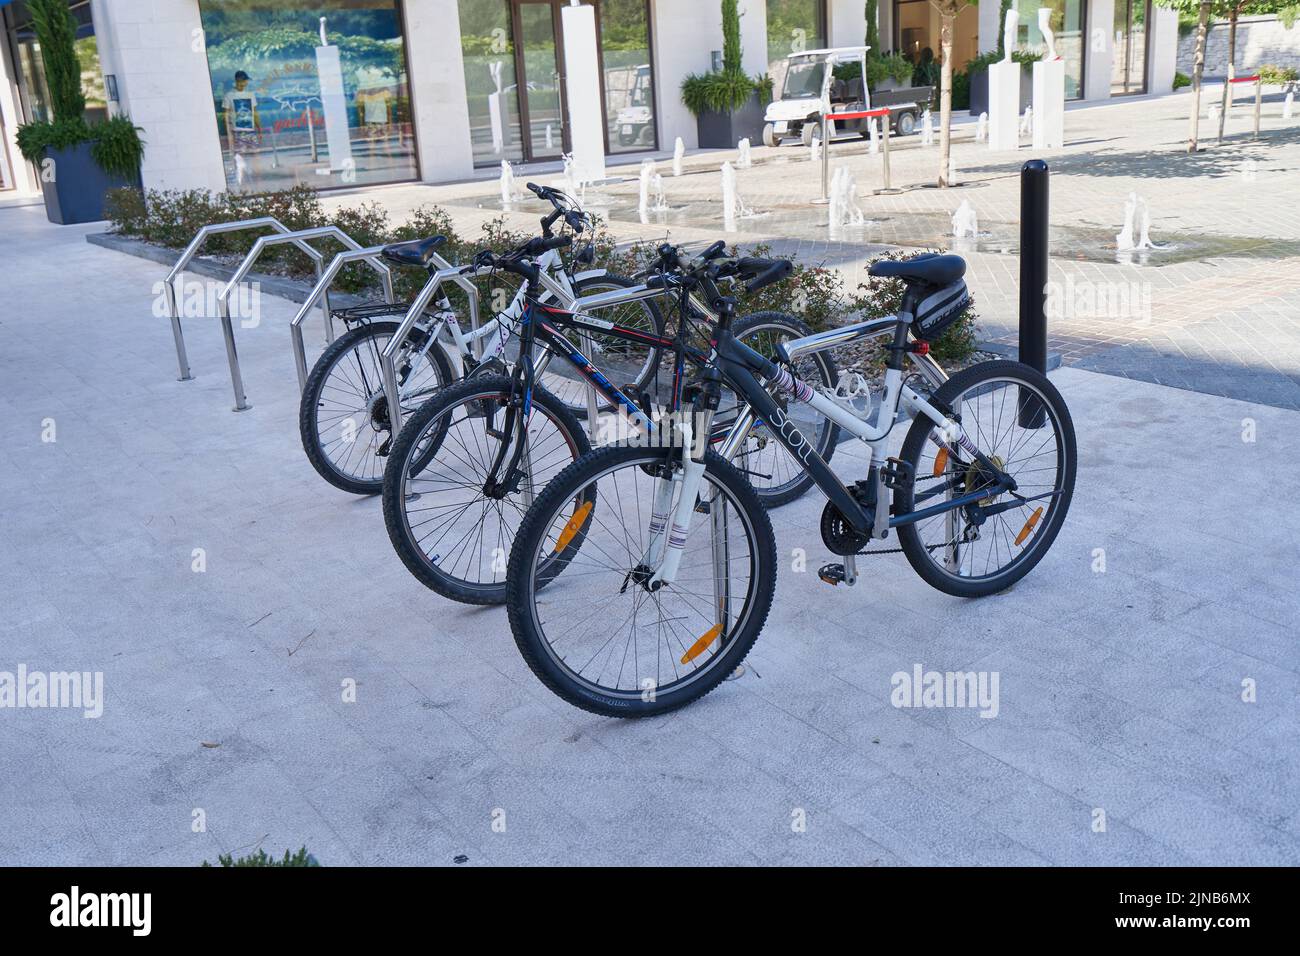 TIVAT, MONTENEGRO - JULY 15, 2021: Parked bikes in a special parking area Stock Photo